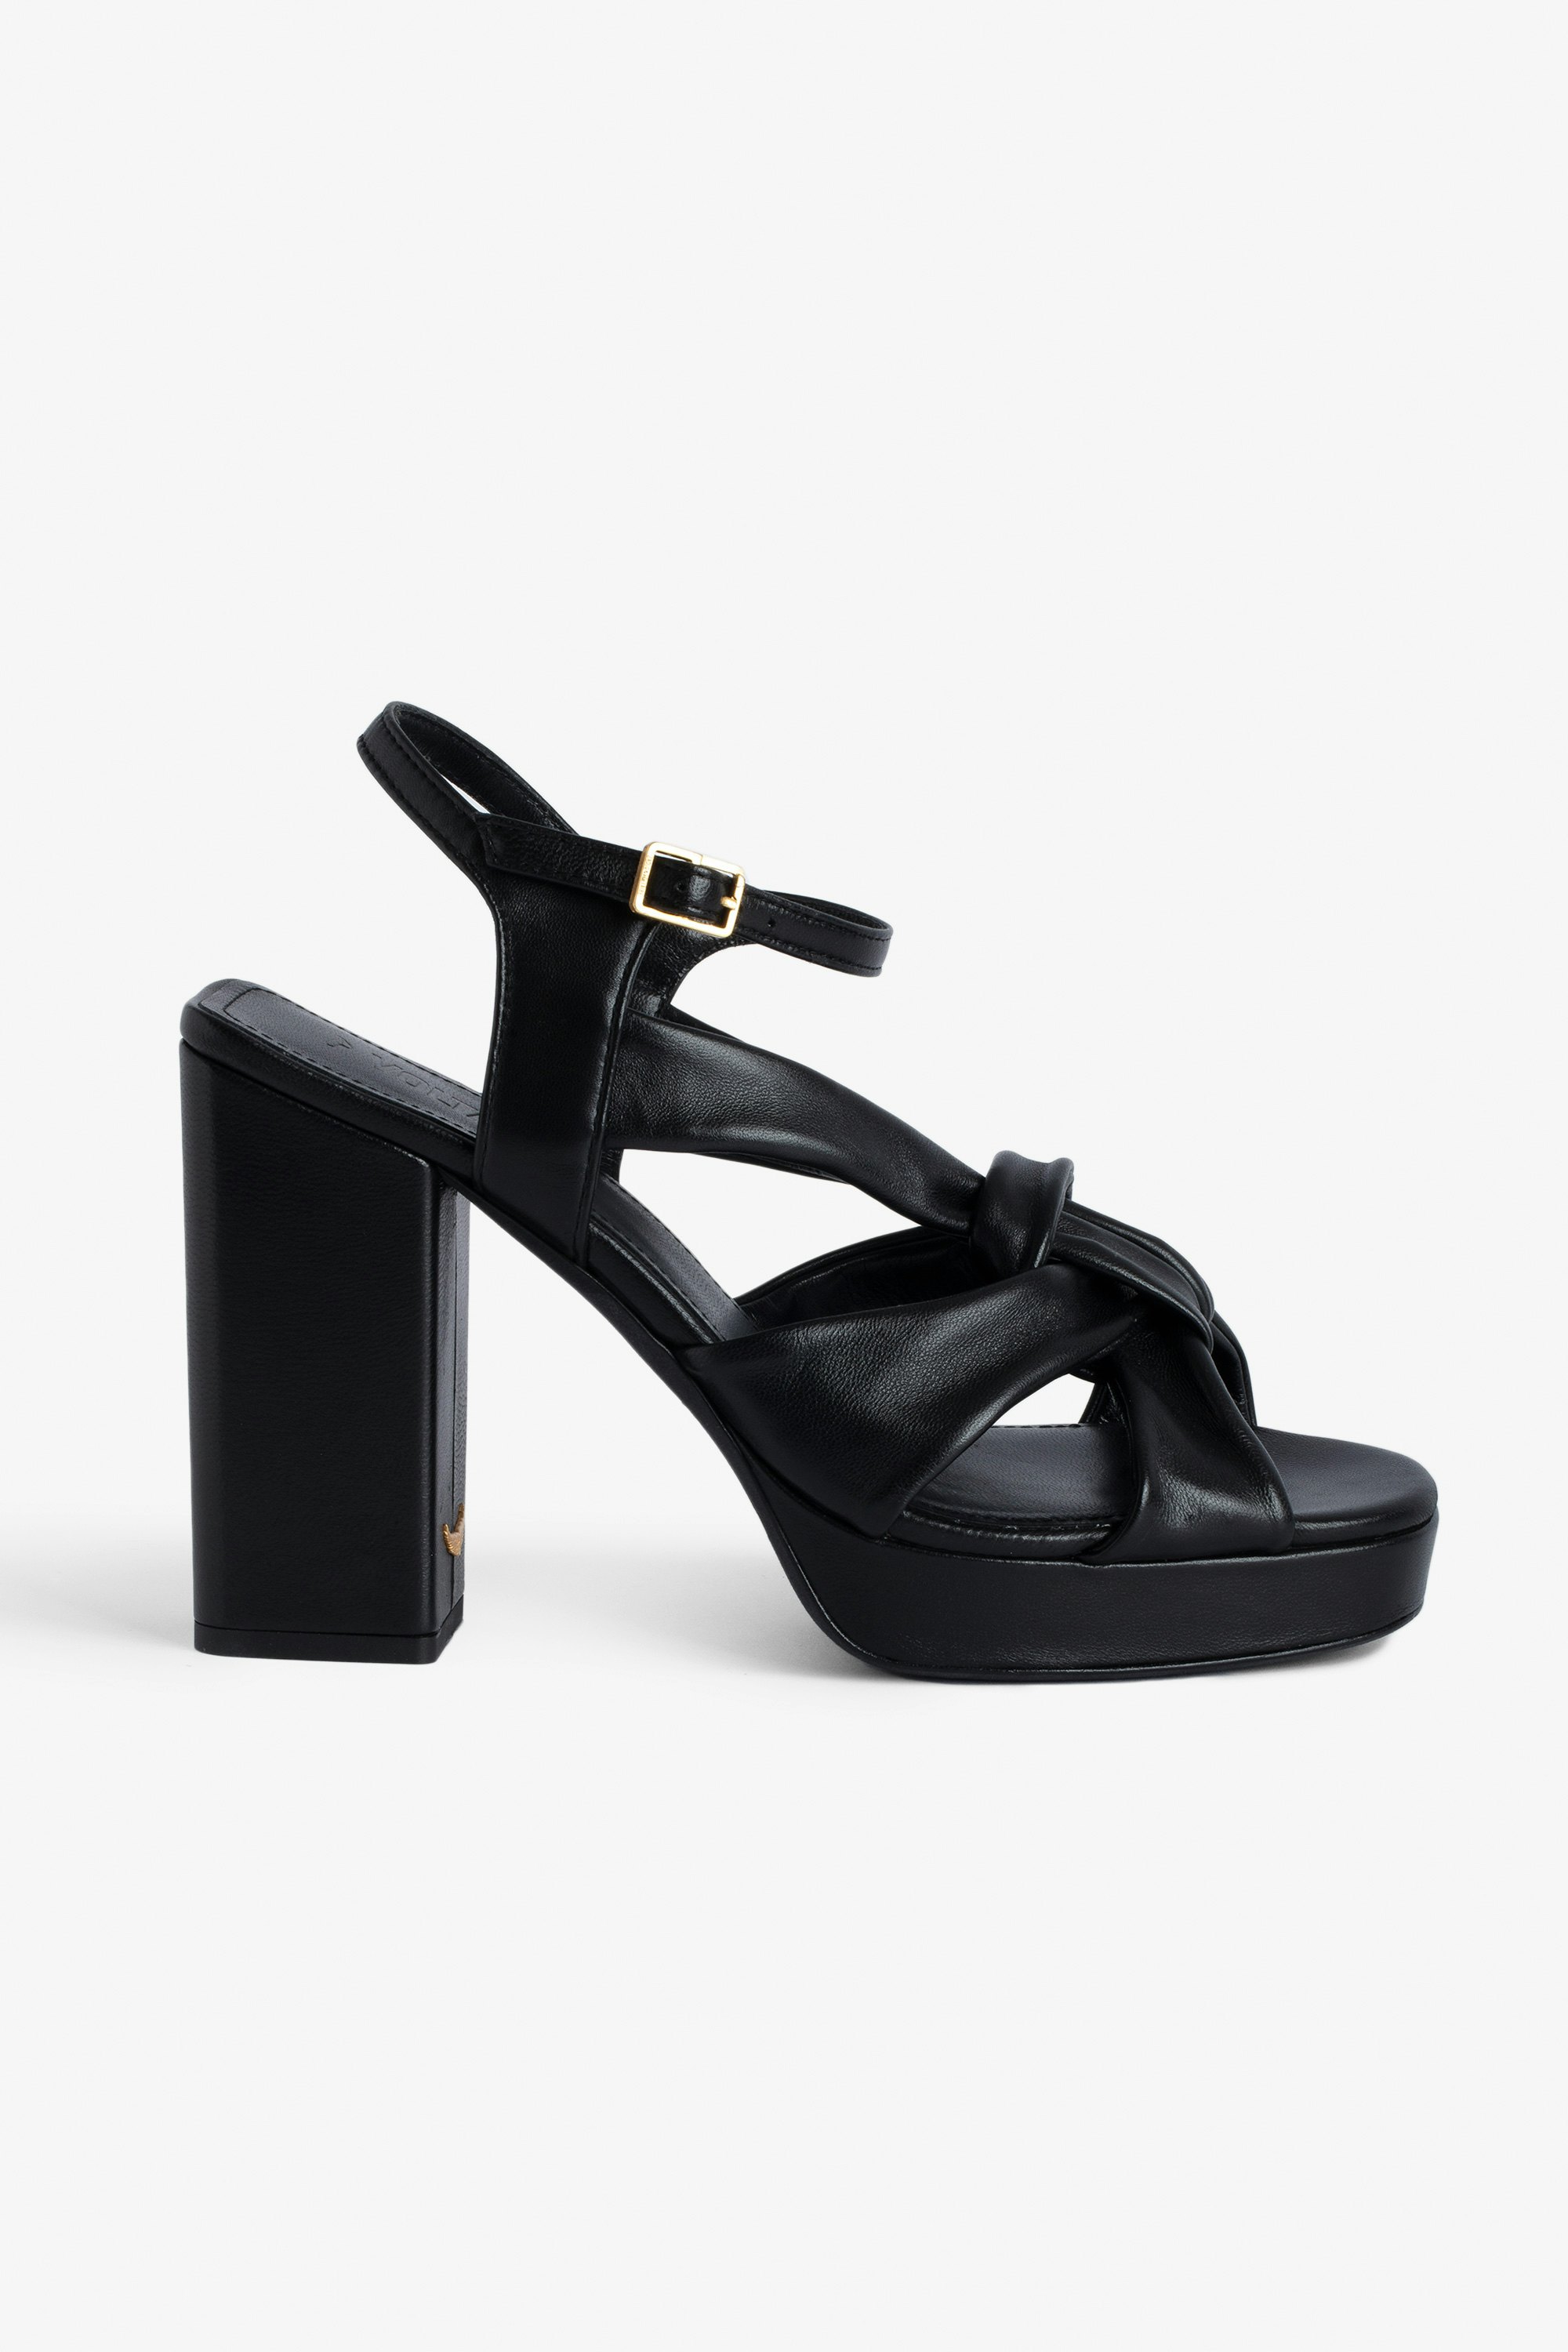 Forget Me Knot Sandals Women’s black leather high-heeled sandals with strap and bow.